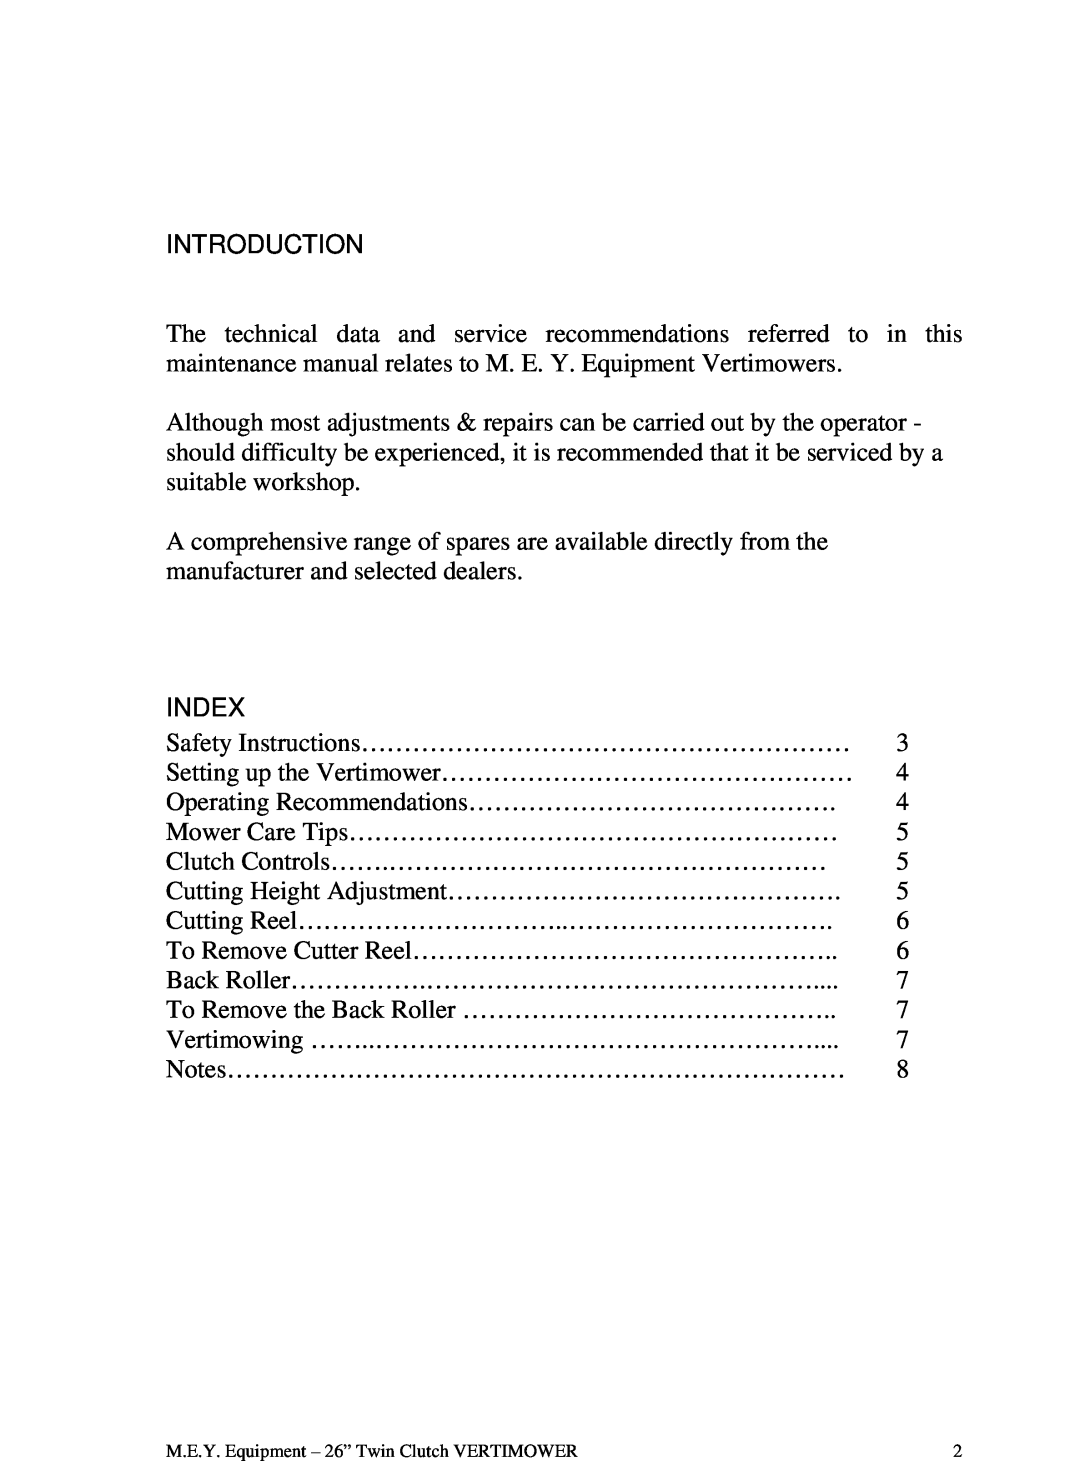 M.E.Y. Equipment 26TCVM owner manual Introduction, Index 